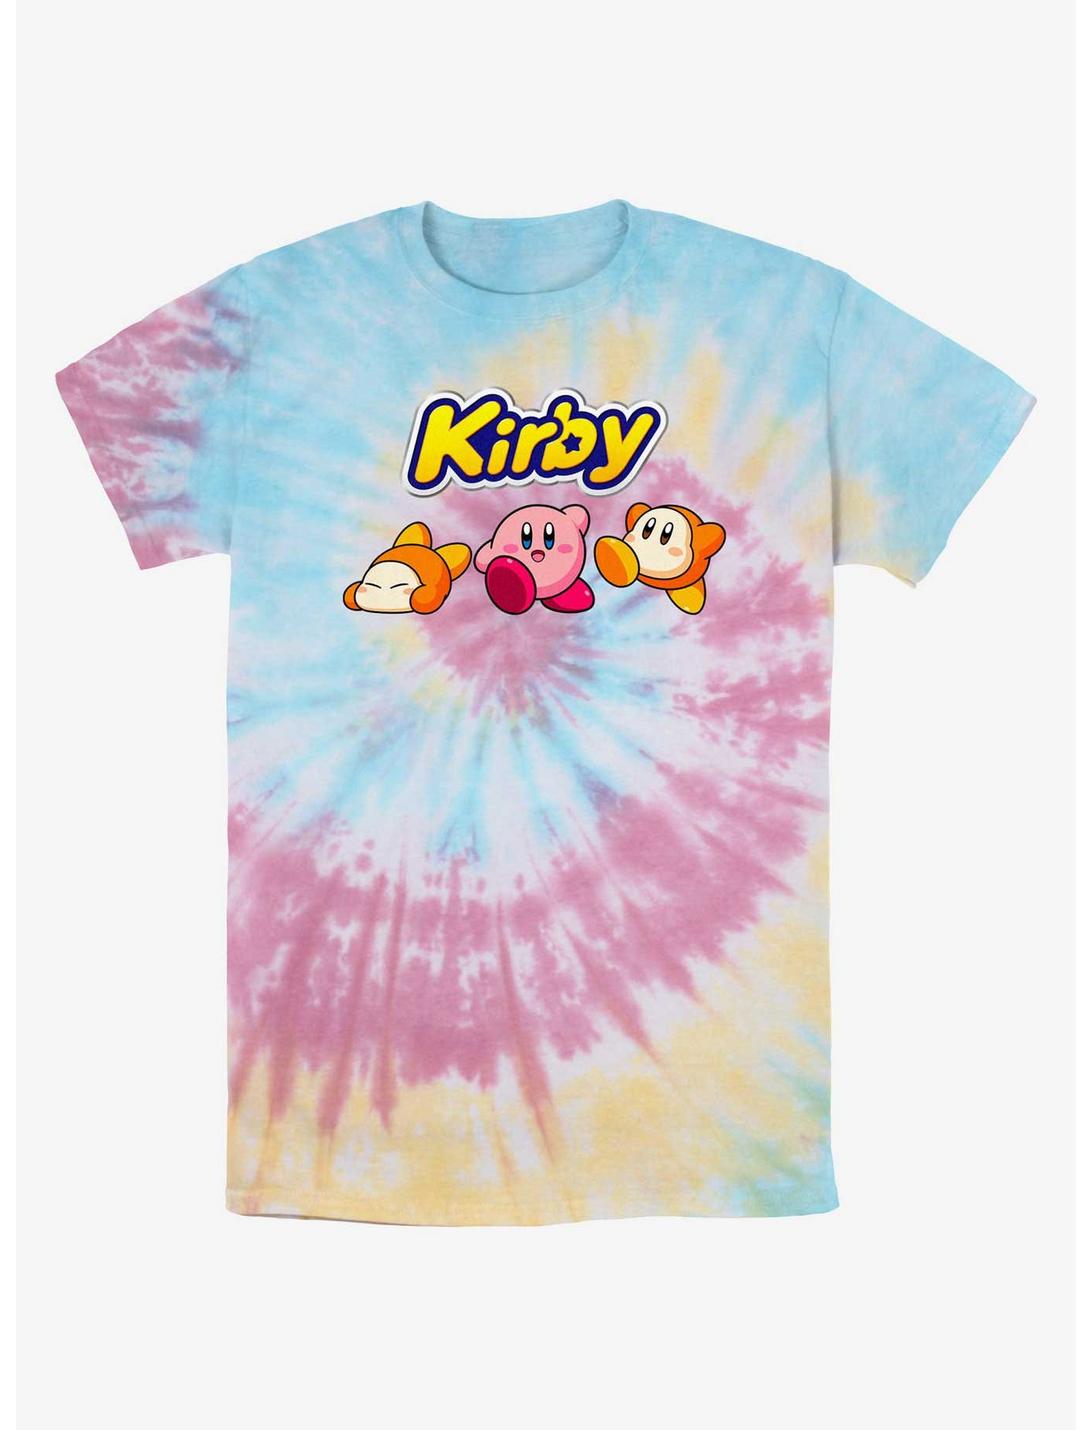 Kirby and Waddle Dee Logo Tie-Dye T-Shirt, BLUPNKLY, hi-res